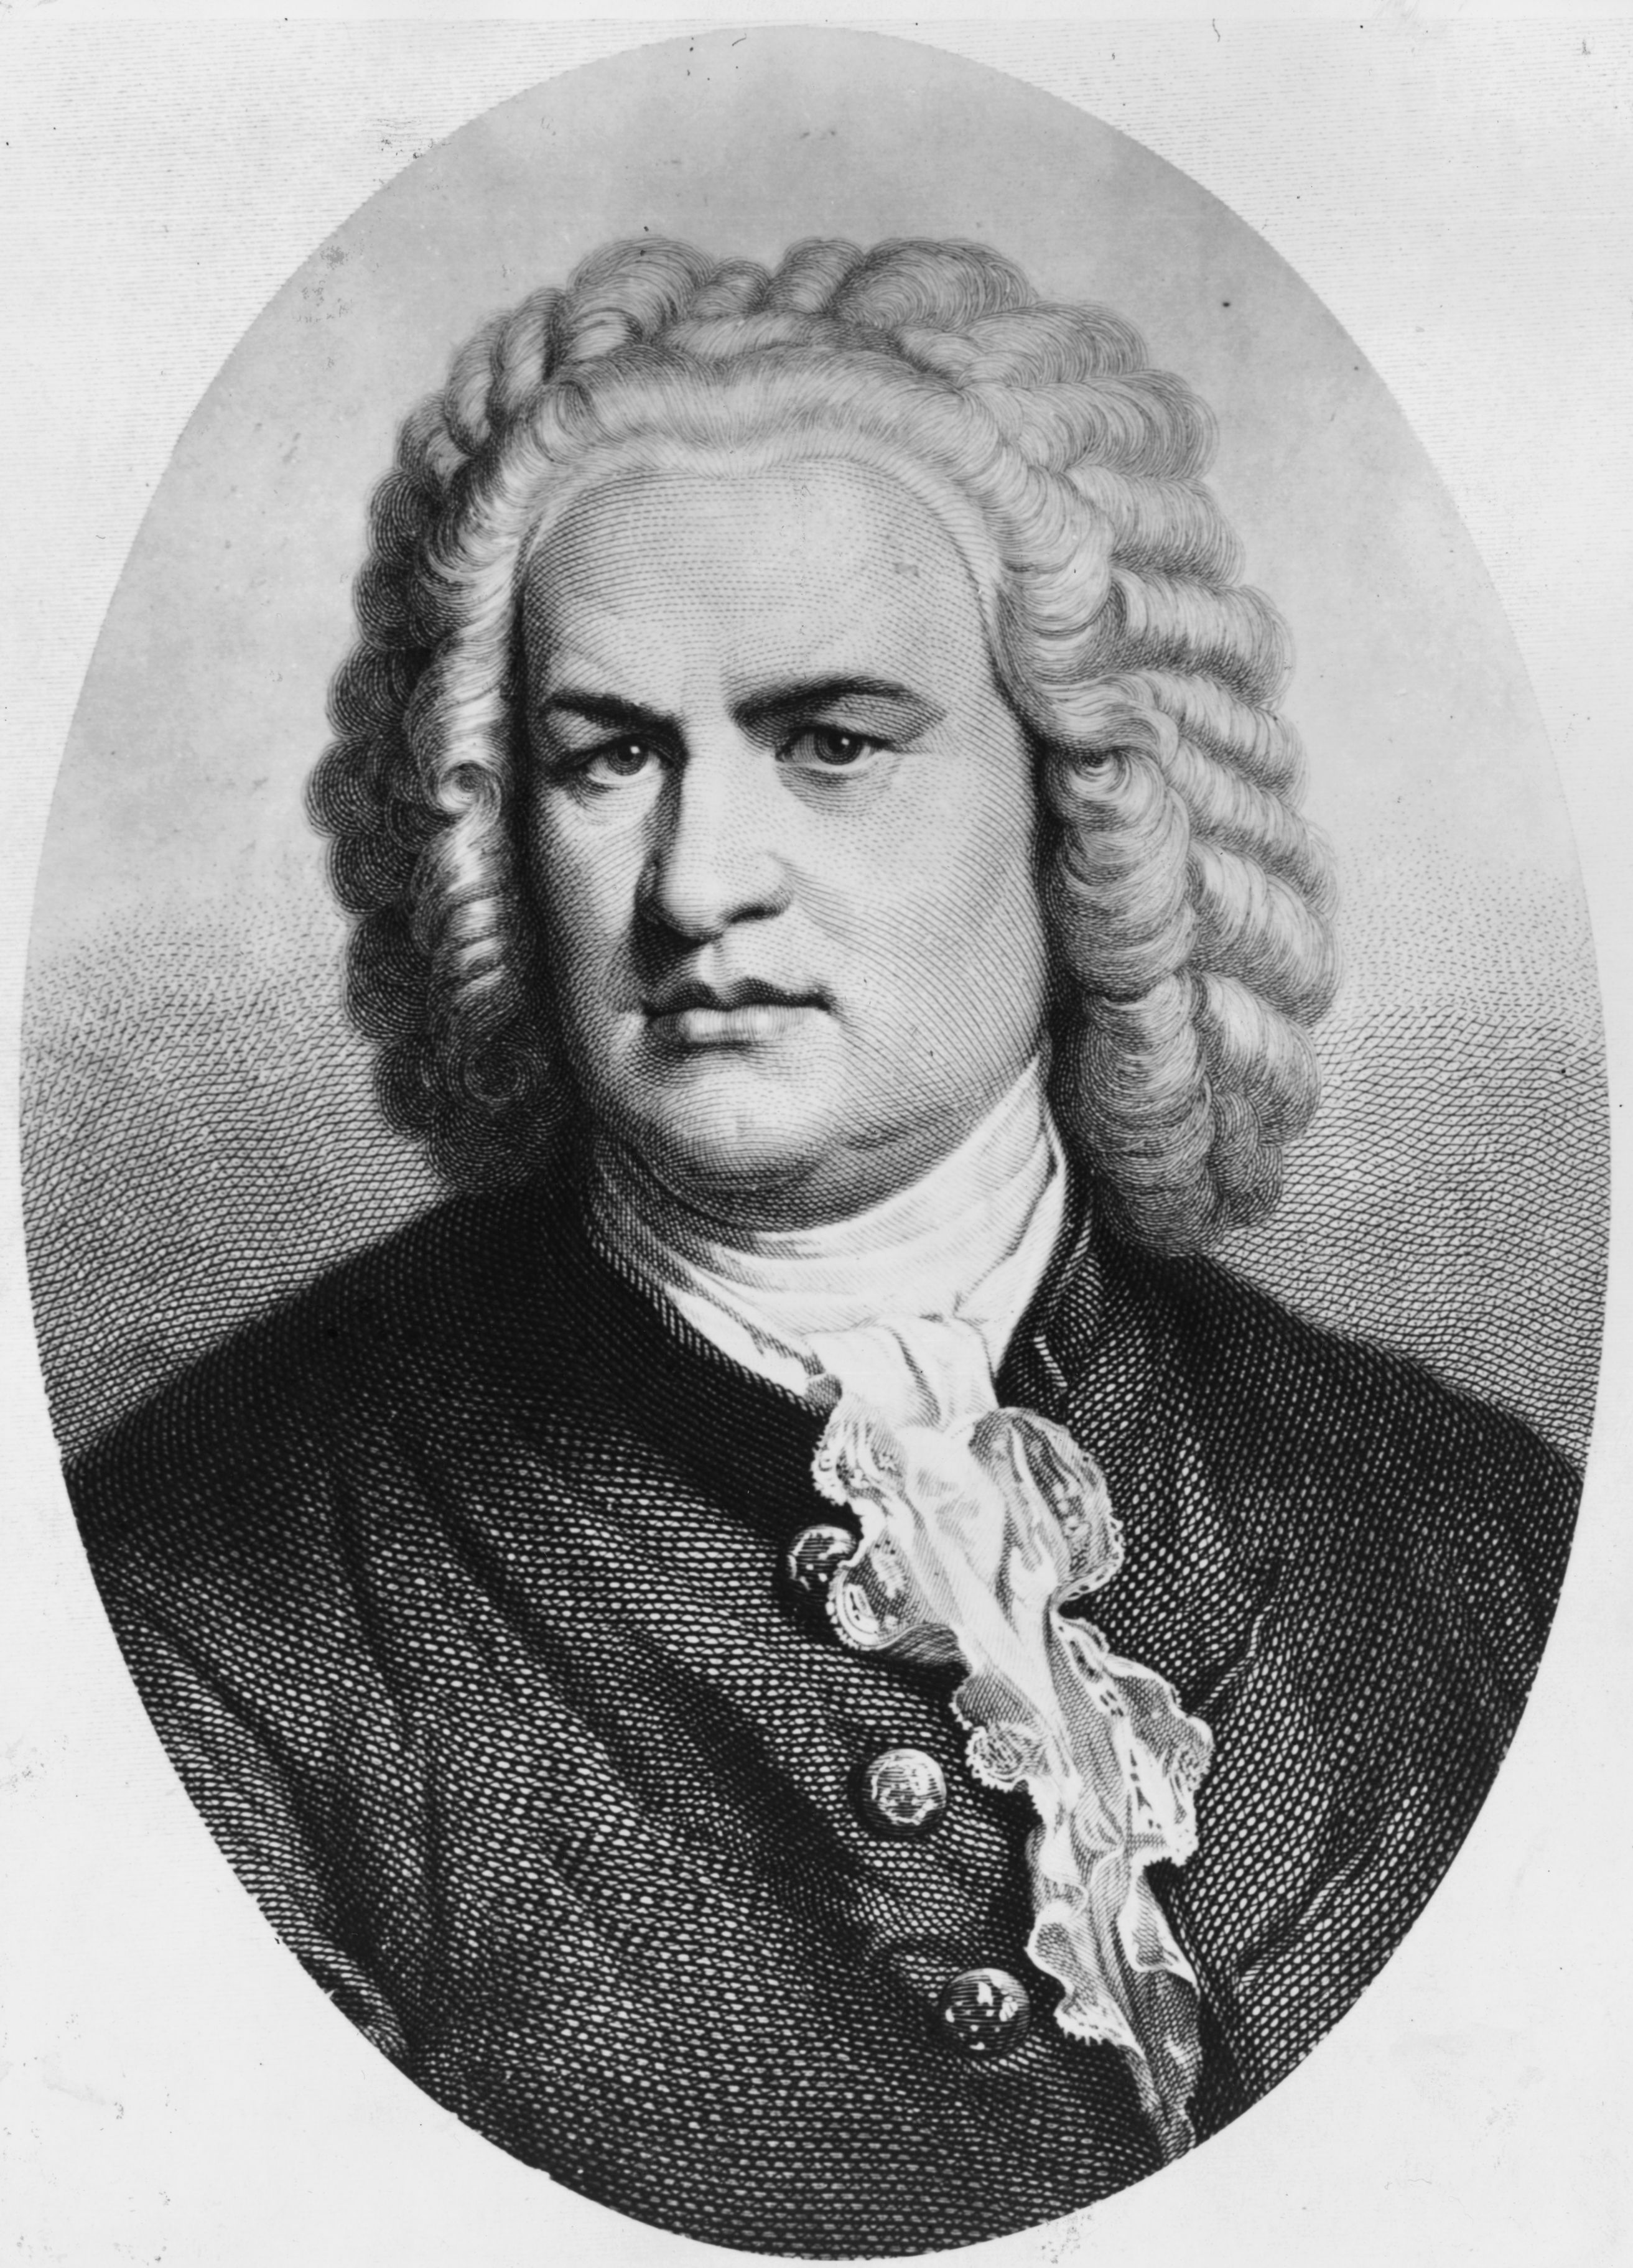 Bach: The Mark of a Genius